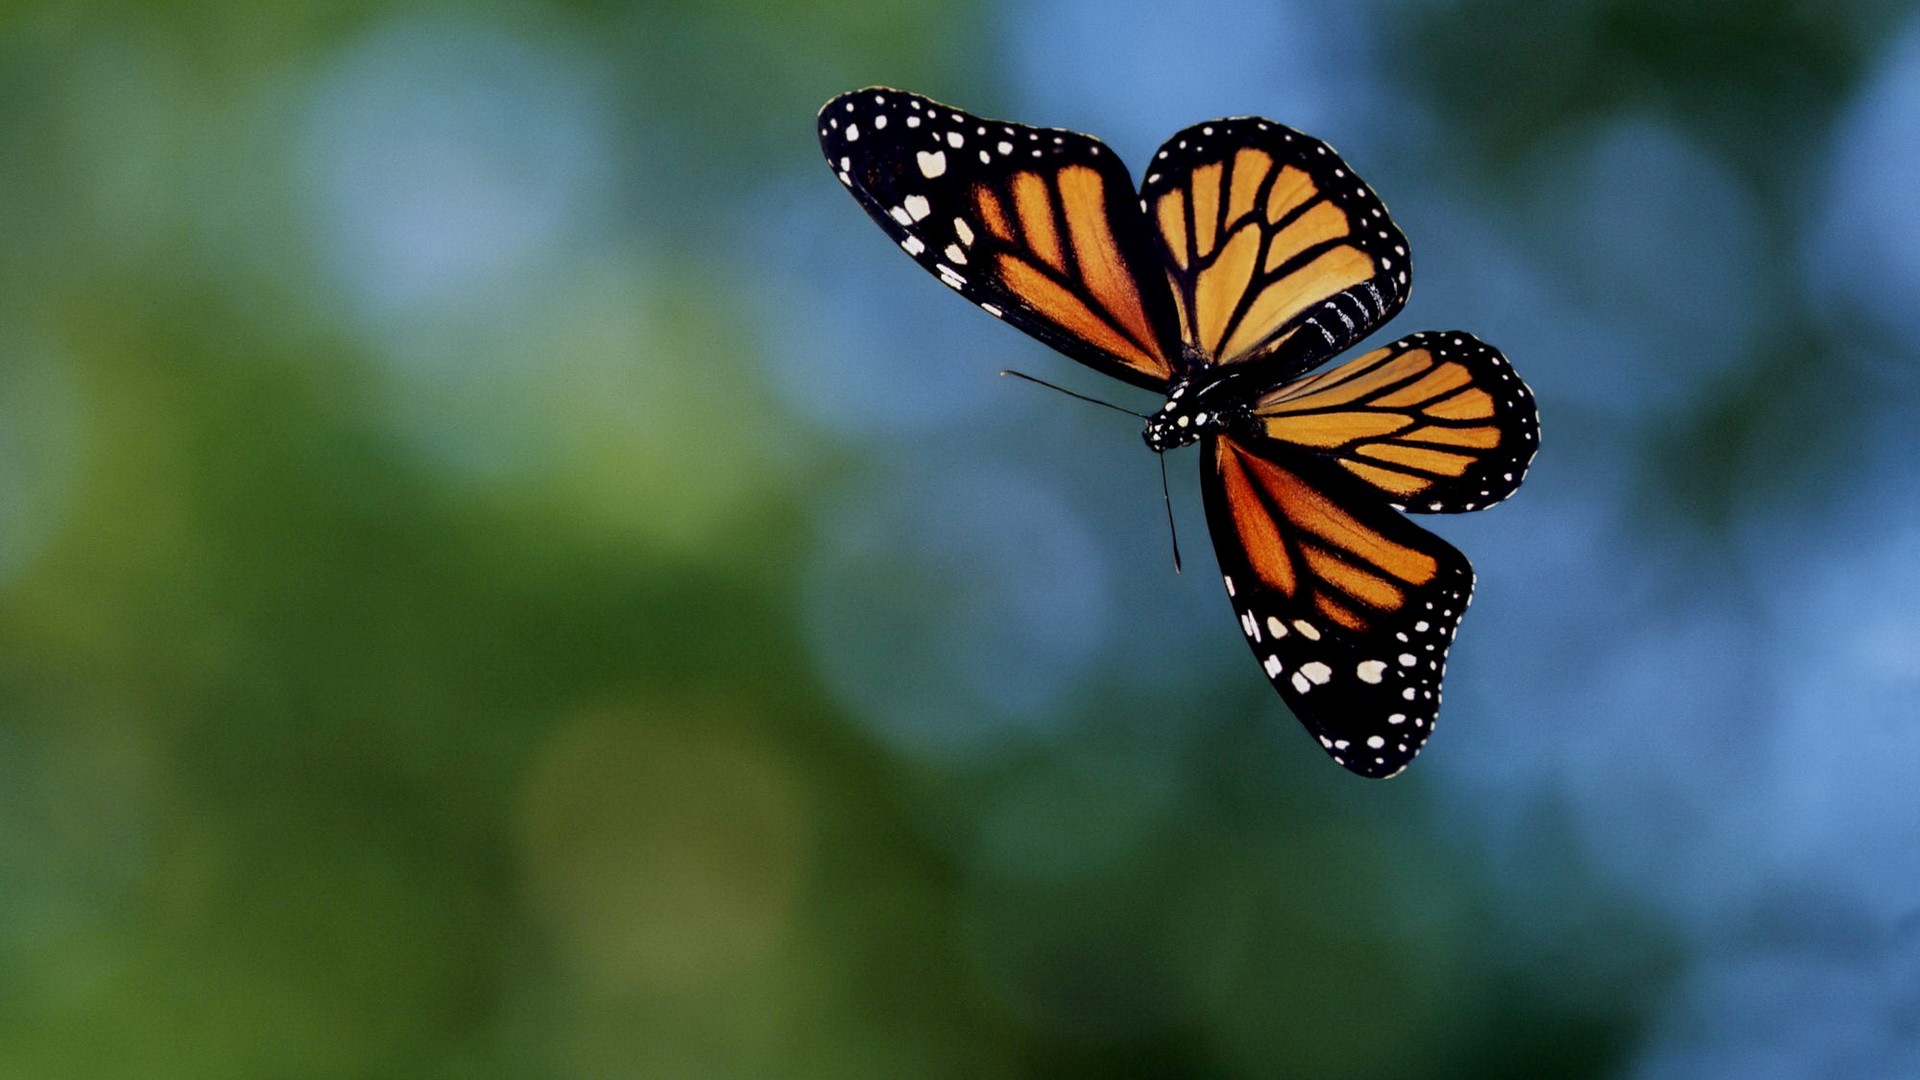 Beautiful Butterfly Wallpapers Hd Pictures One Hd Wallpaper - Flying Butterfly Hd - HD Wallpaper 